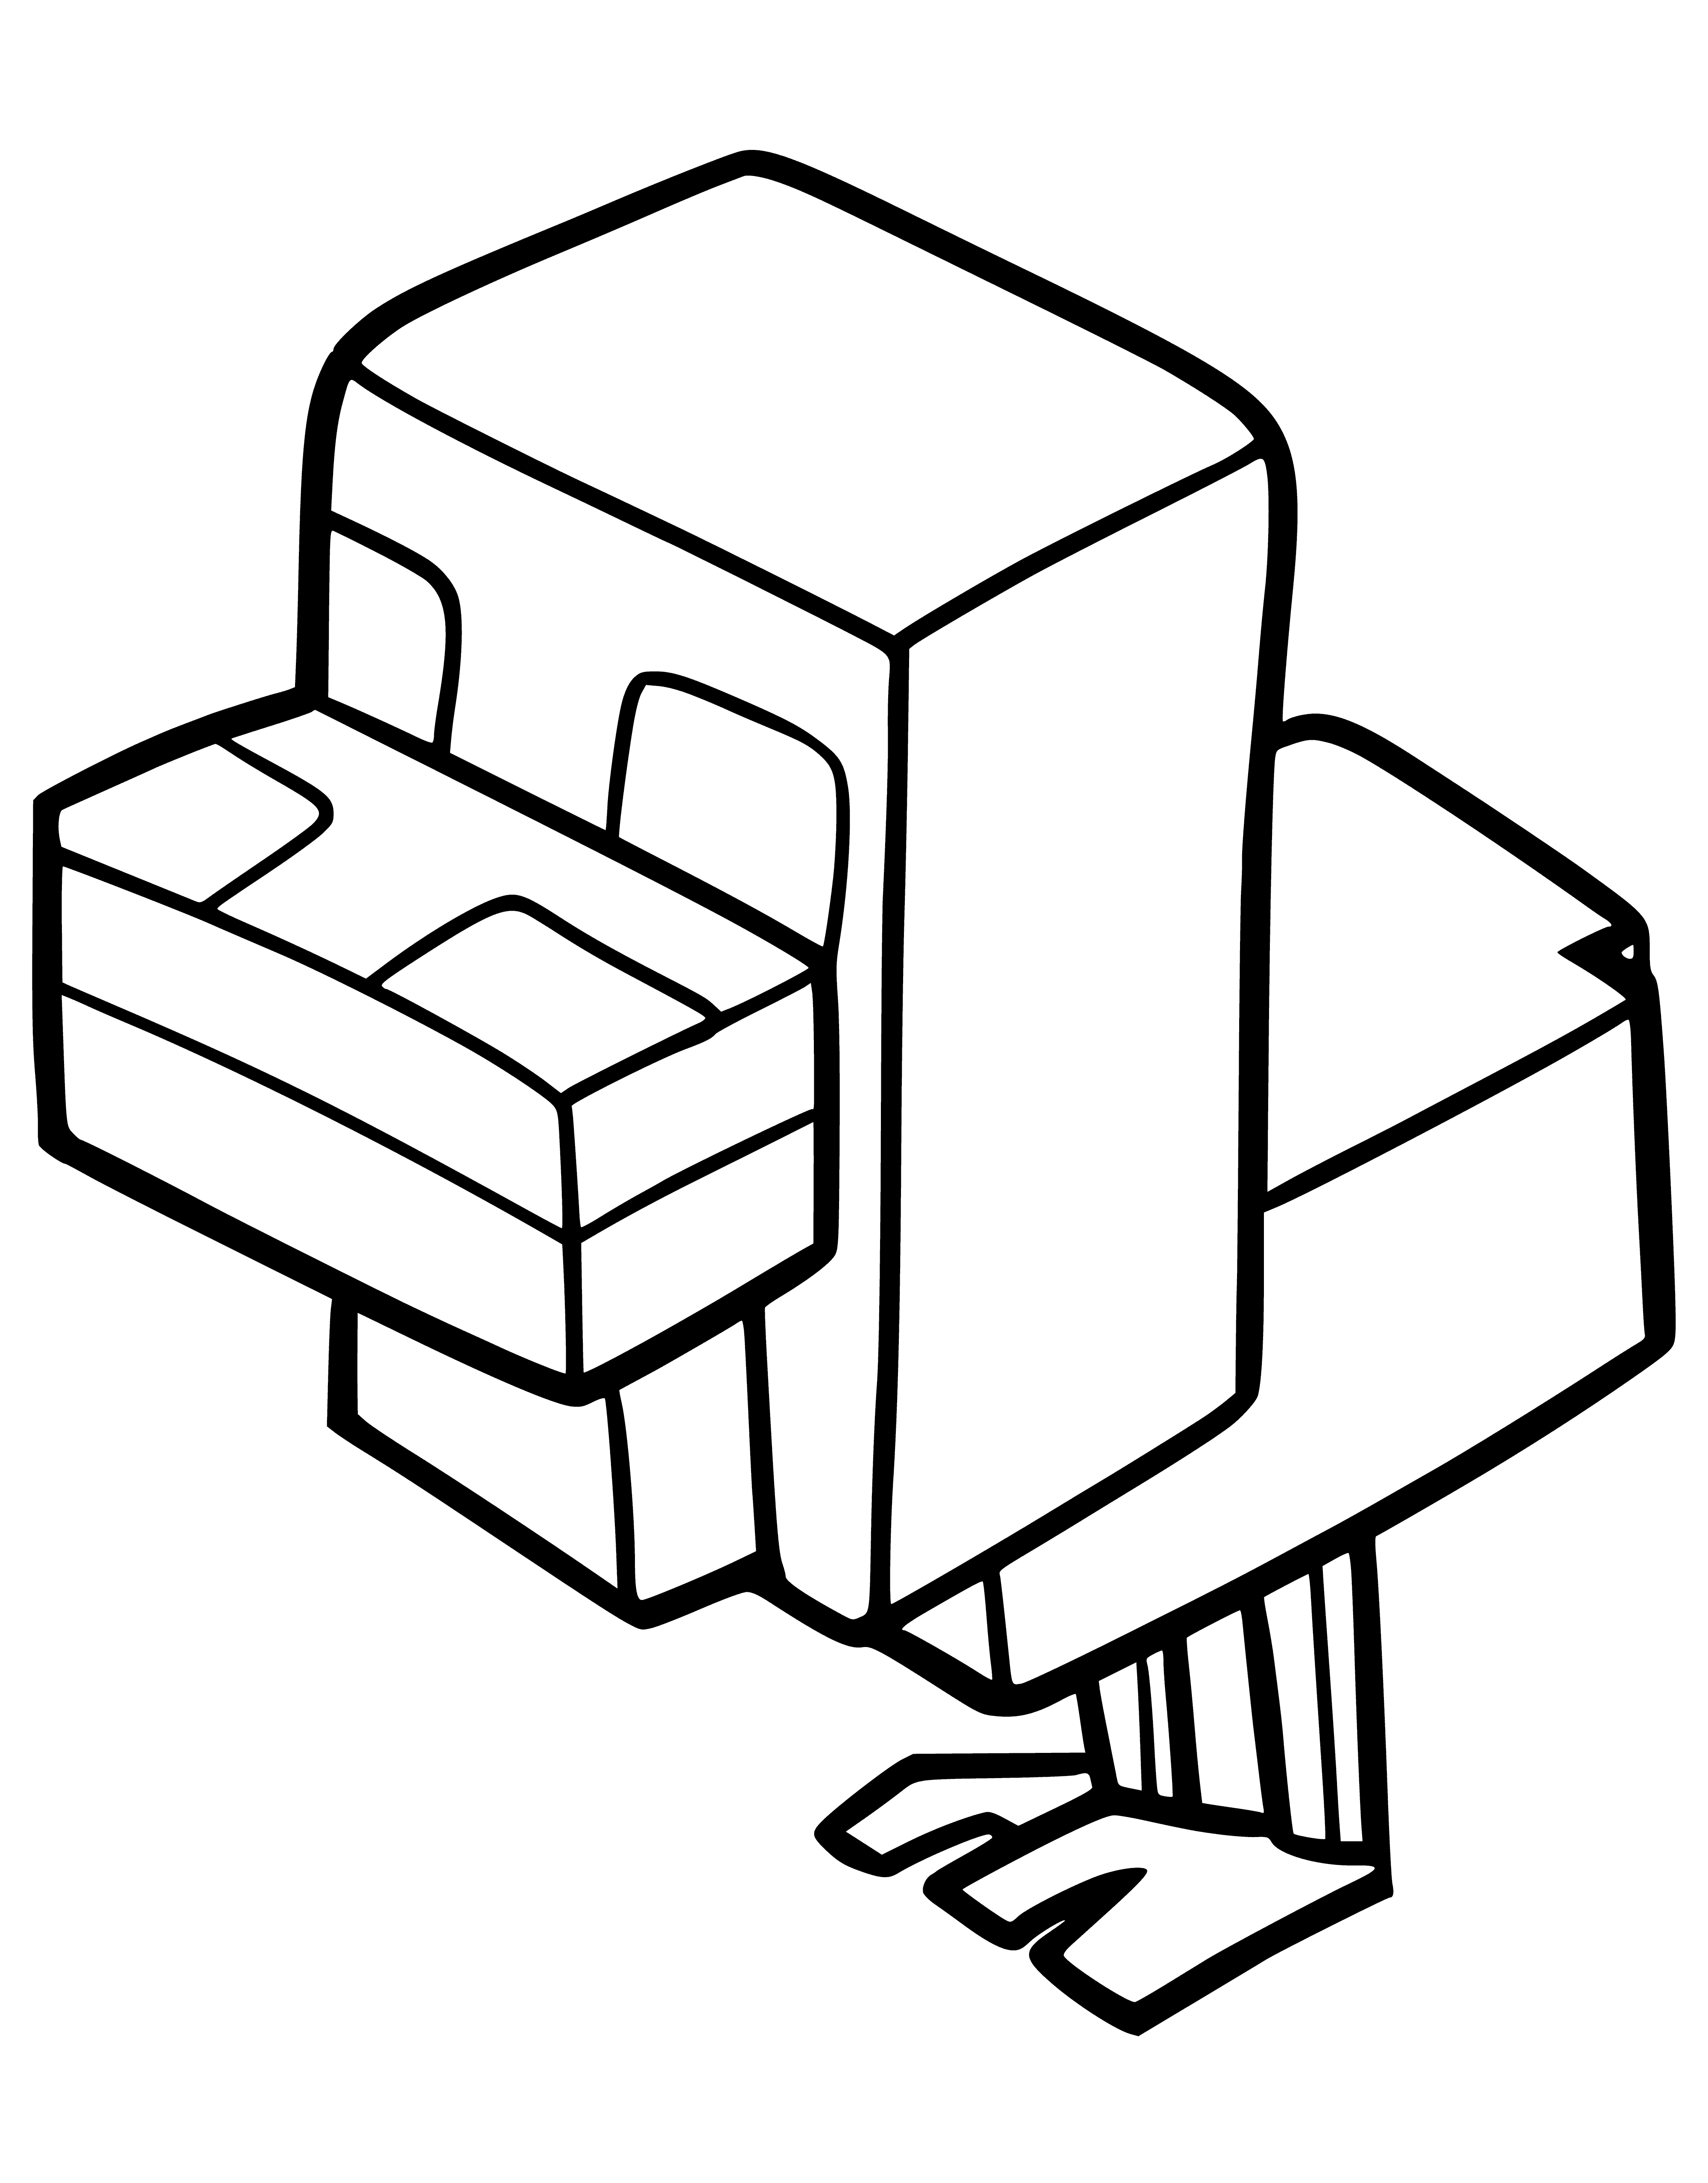 coloring page: Minecraft chicken stands on green grass, brown/white feathers, dirt block behind.